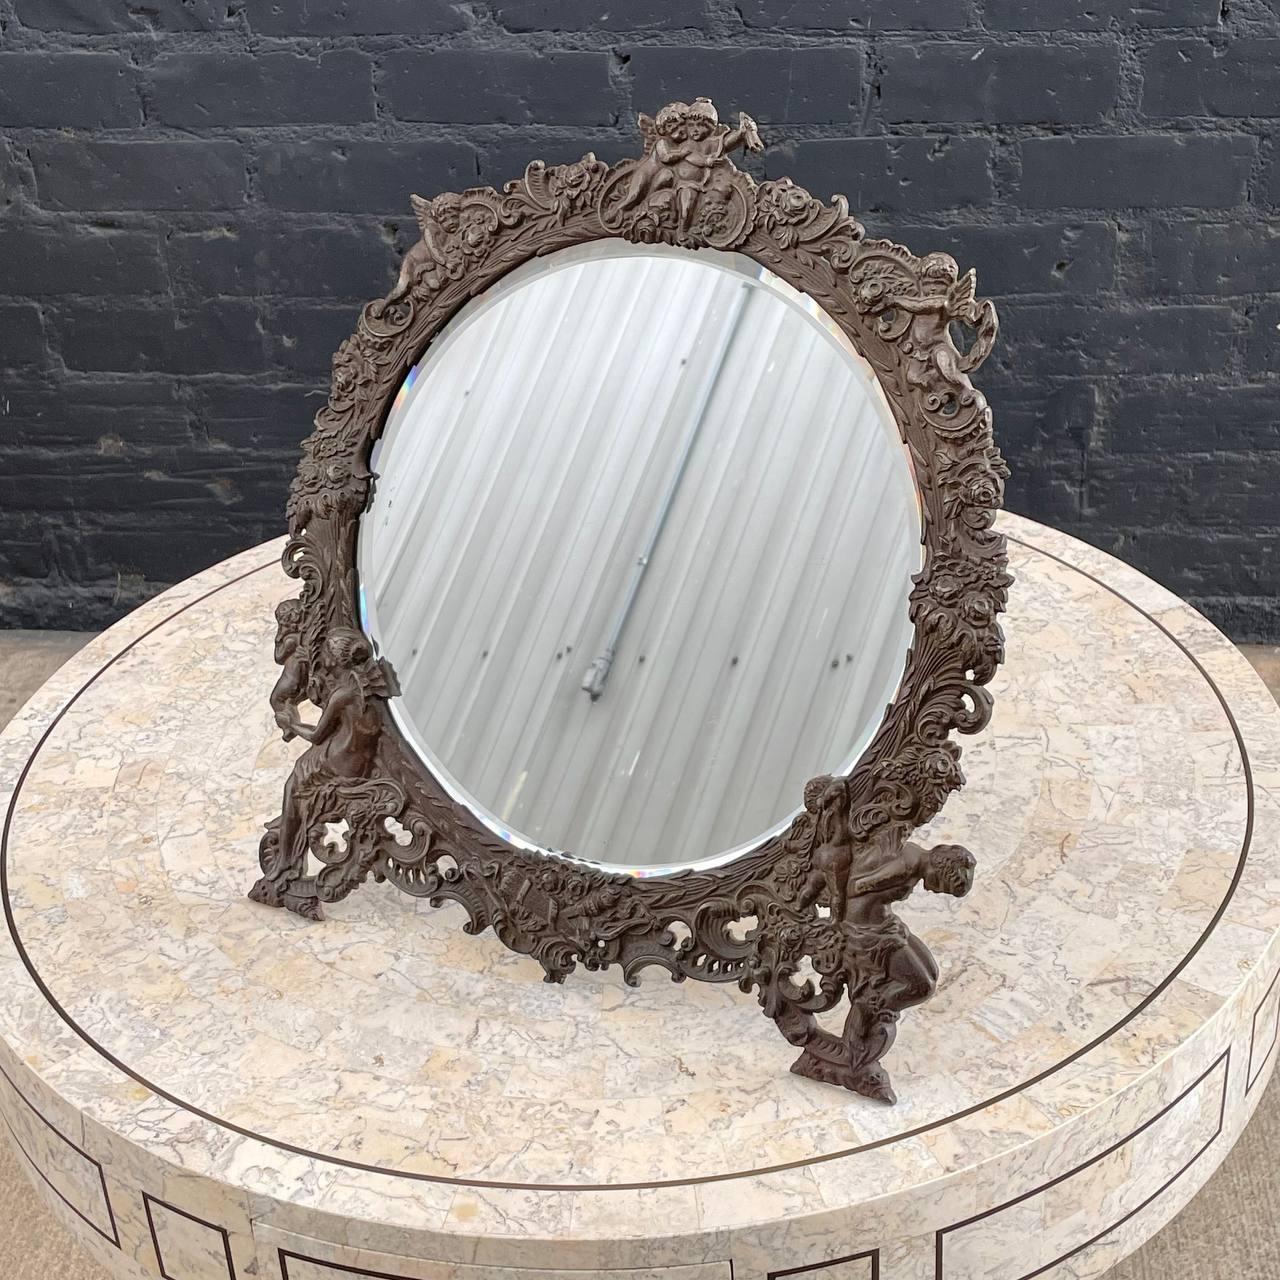 Antique Victorian Metal Vanity or Wall Mirror with Cherub Details

Country: United States
Materials: Silver Metal
Condition: Original Vintage Condition
Style: Victorian
Year: 1920s

$1,100

Dimensions:
16”H x 14”W x 1”D.